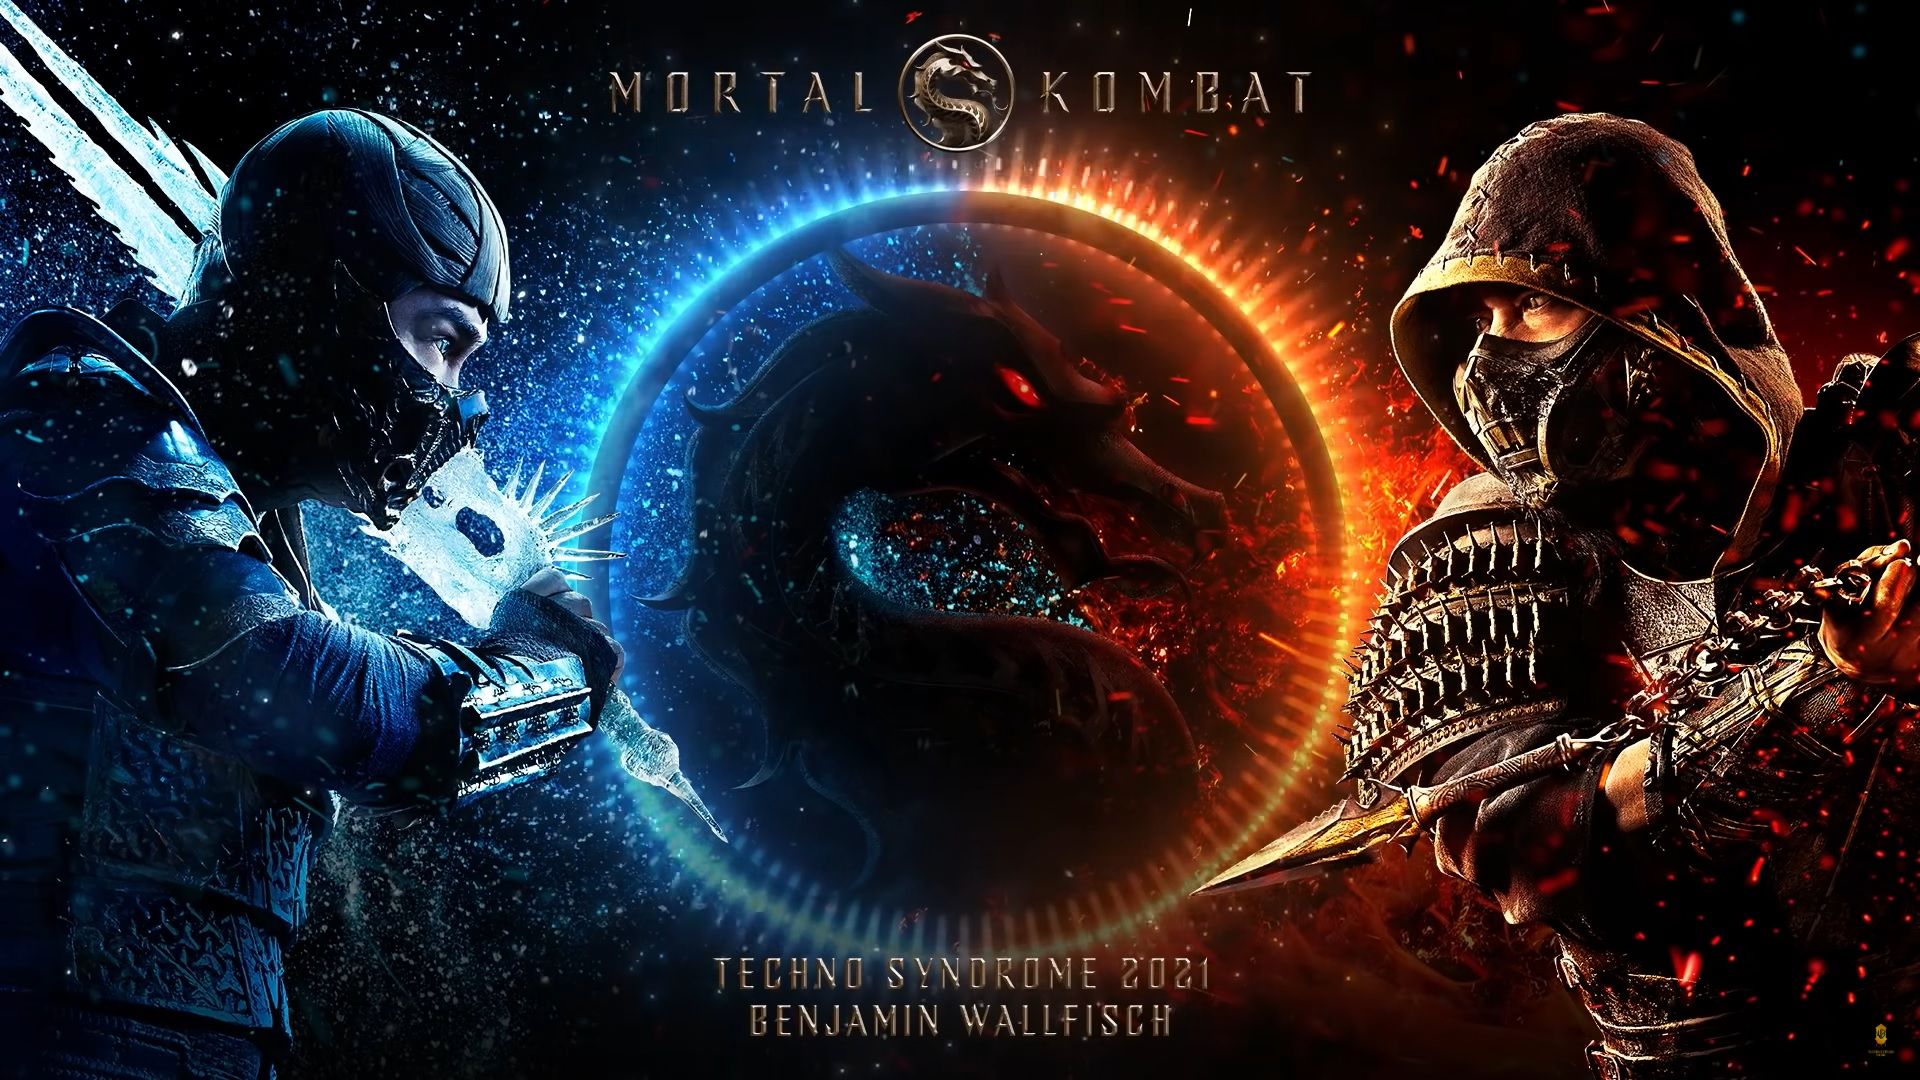 The Mortal Kombat Reboot's Theme Song Is Out Now!